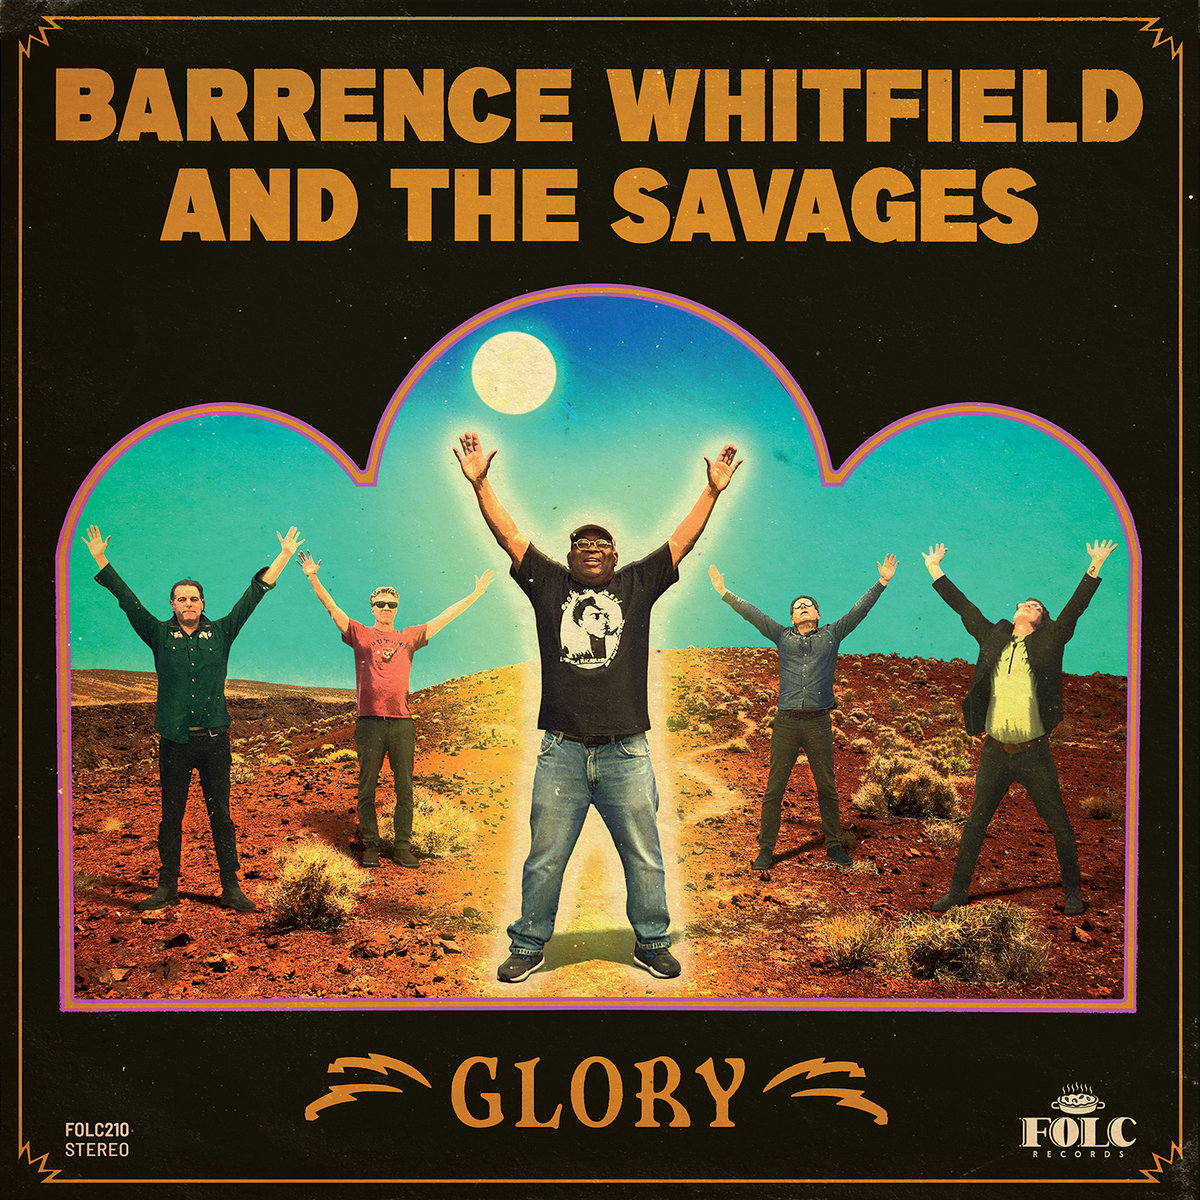 Barrence Whitfield & The Savages - Glory  (Vinyl LP) *Spesialimport*